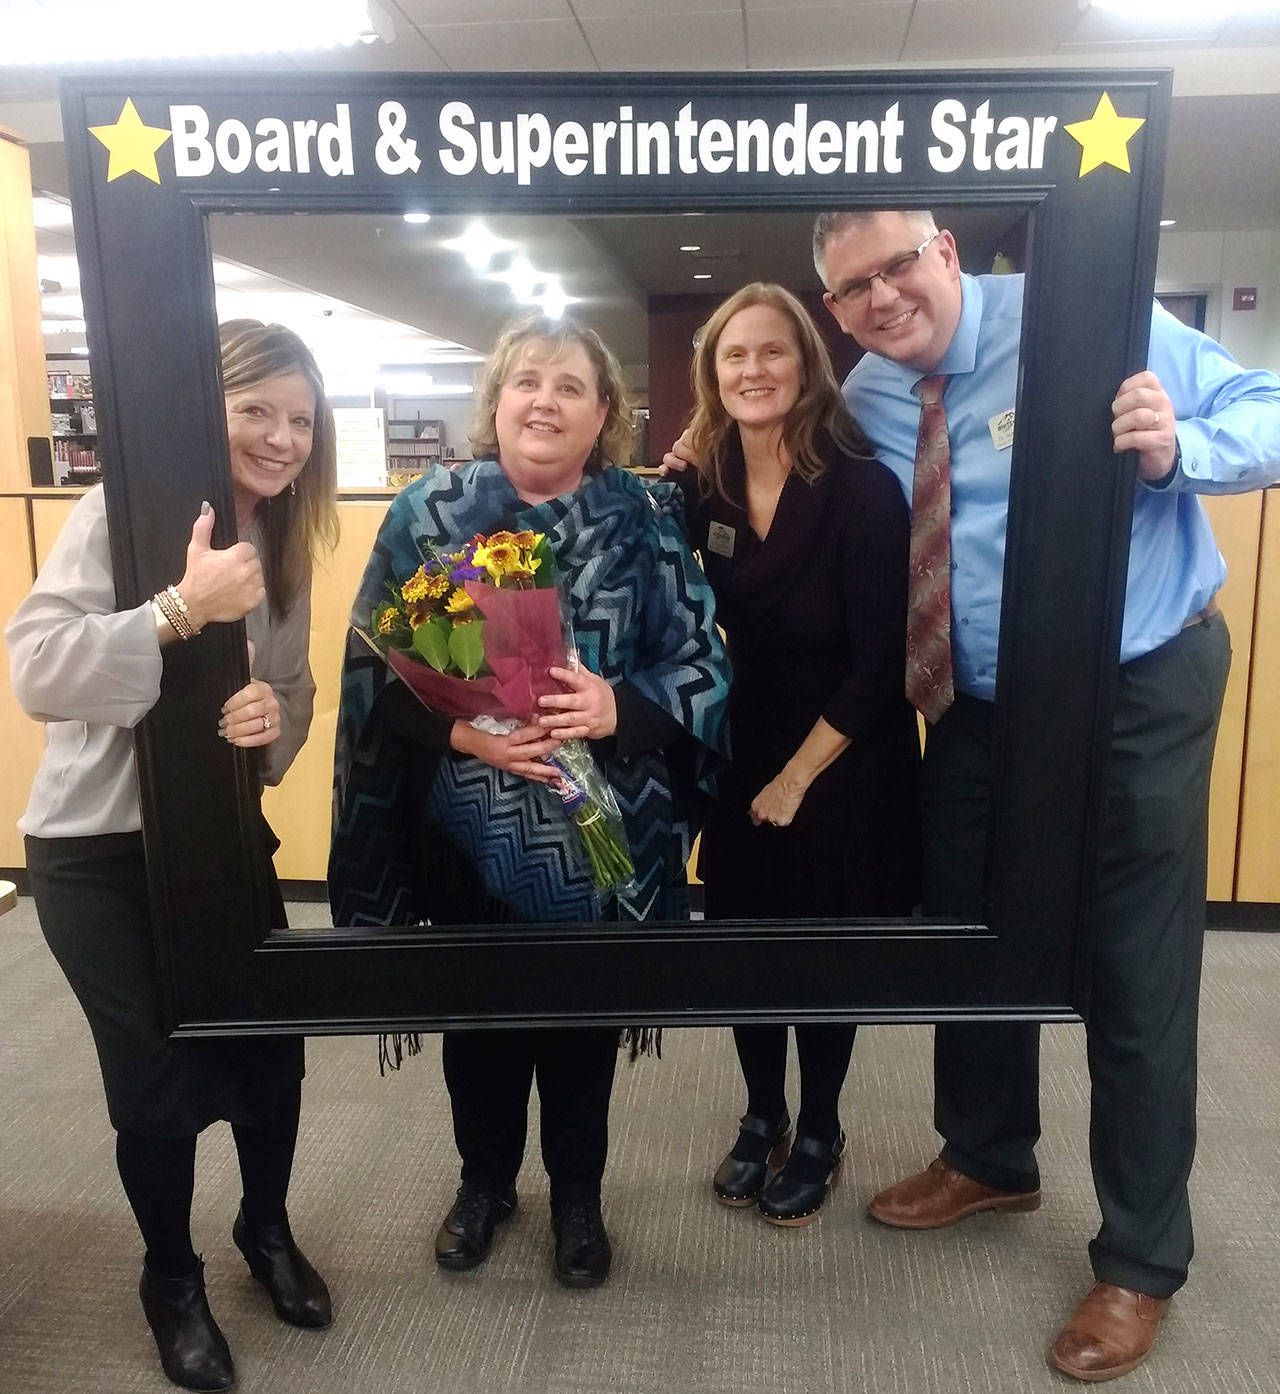 Taking part in a Nov. 13 ceremony were, from left: Janel Keating Hambly, superintendent; Monica Gaub; Connie Martin, director of Student Support Services; and Dr. Steve Leifsen, Director of Equity and Achievement. Photo courtesy White River School District